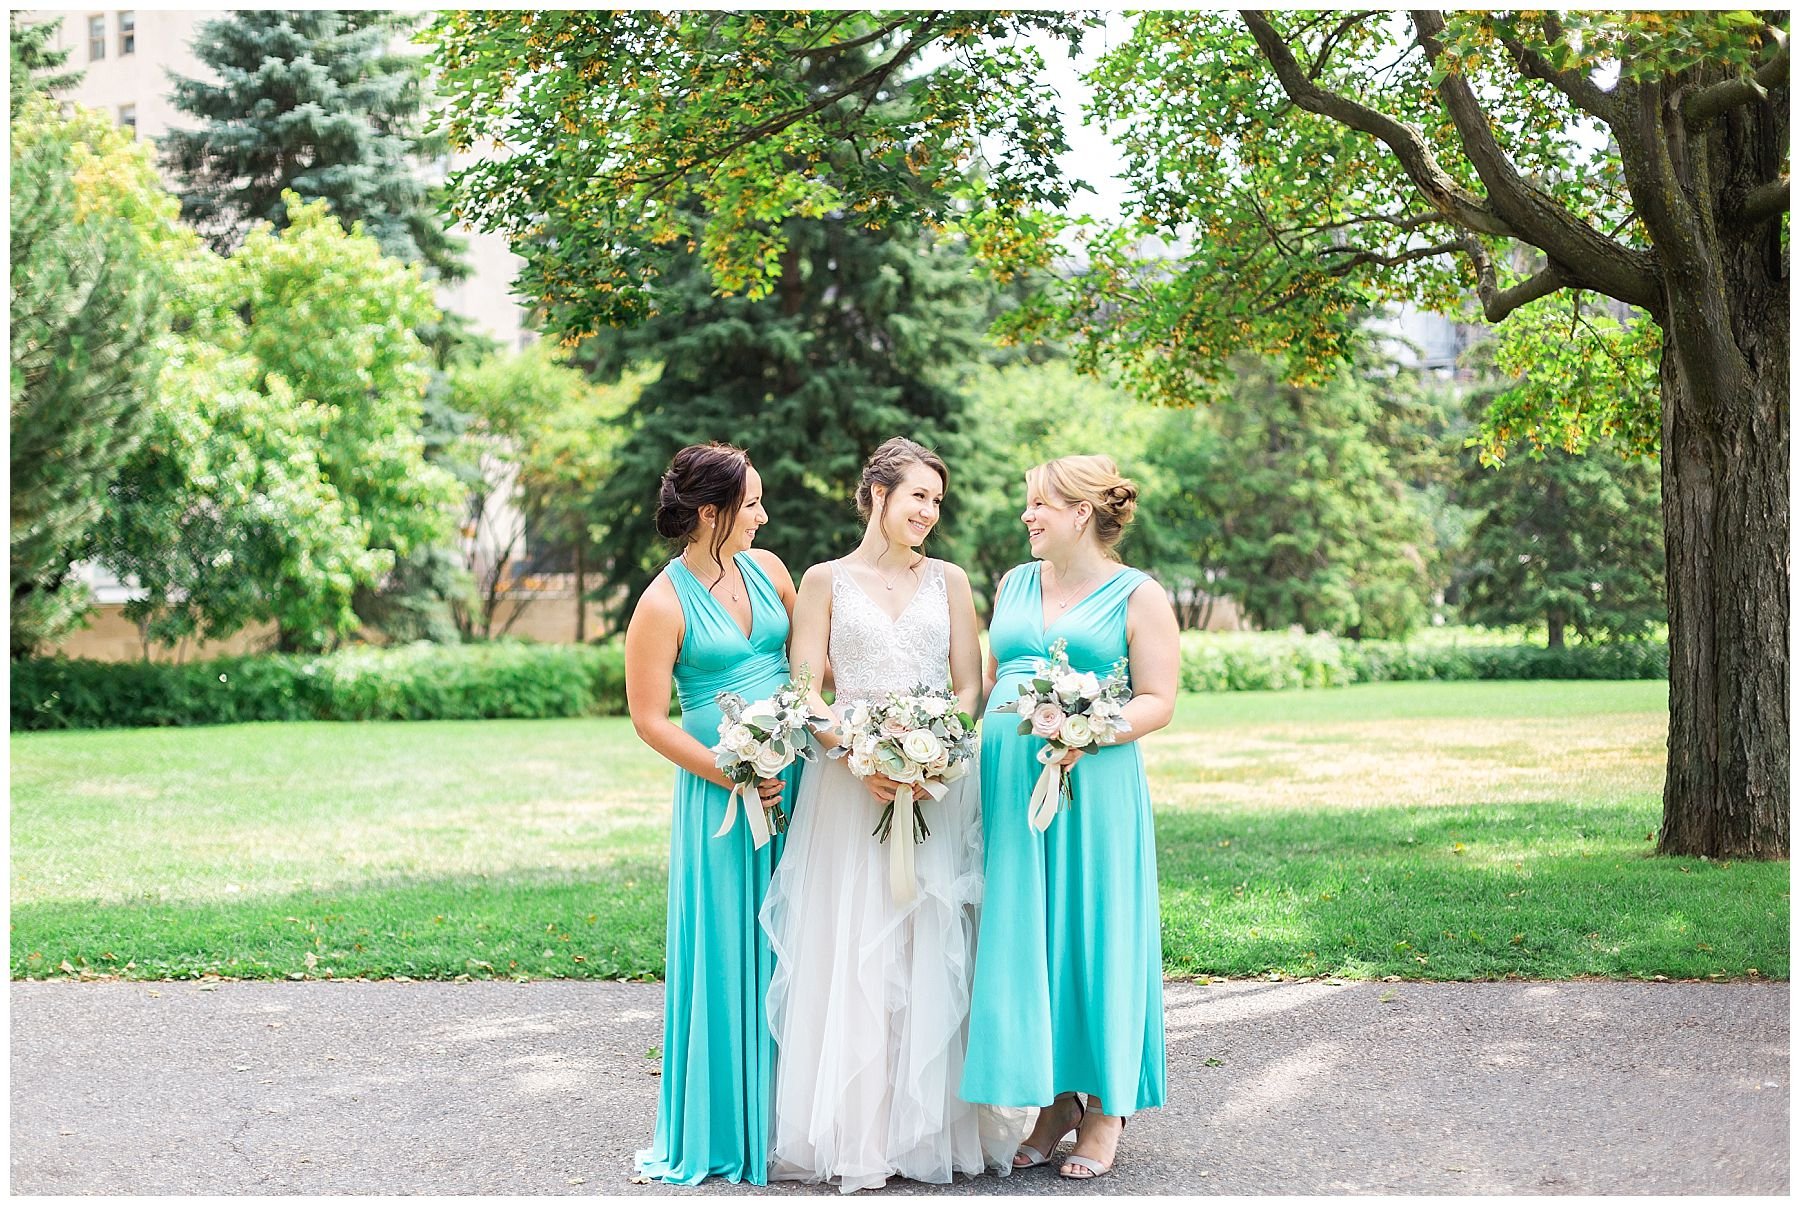 Turquoise blue bridesmaids photos at Major hill park in Ottawa